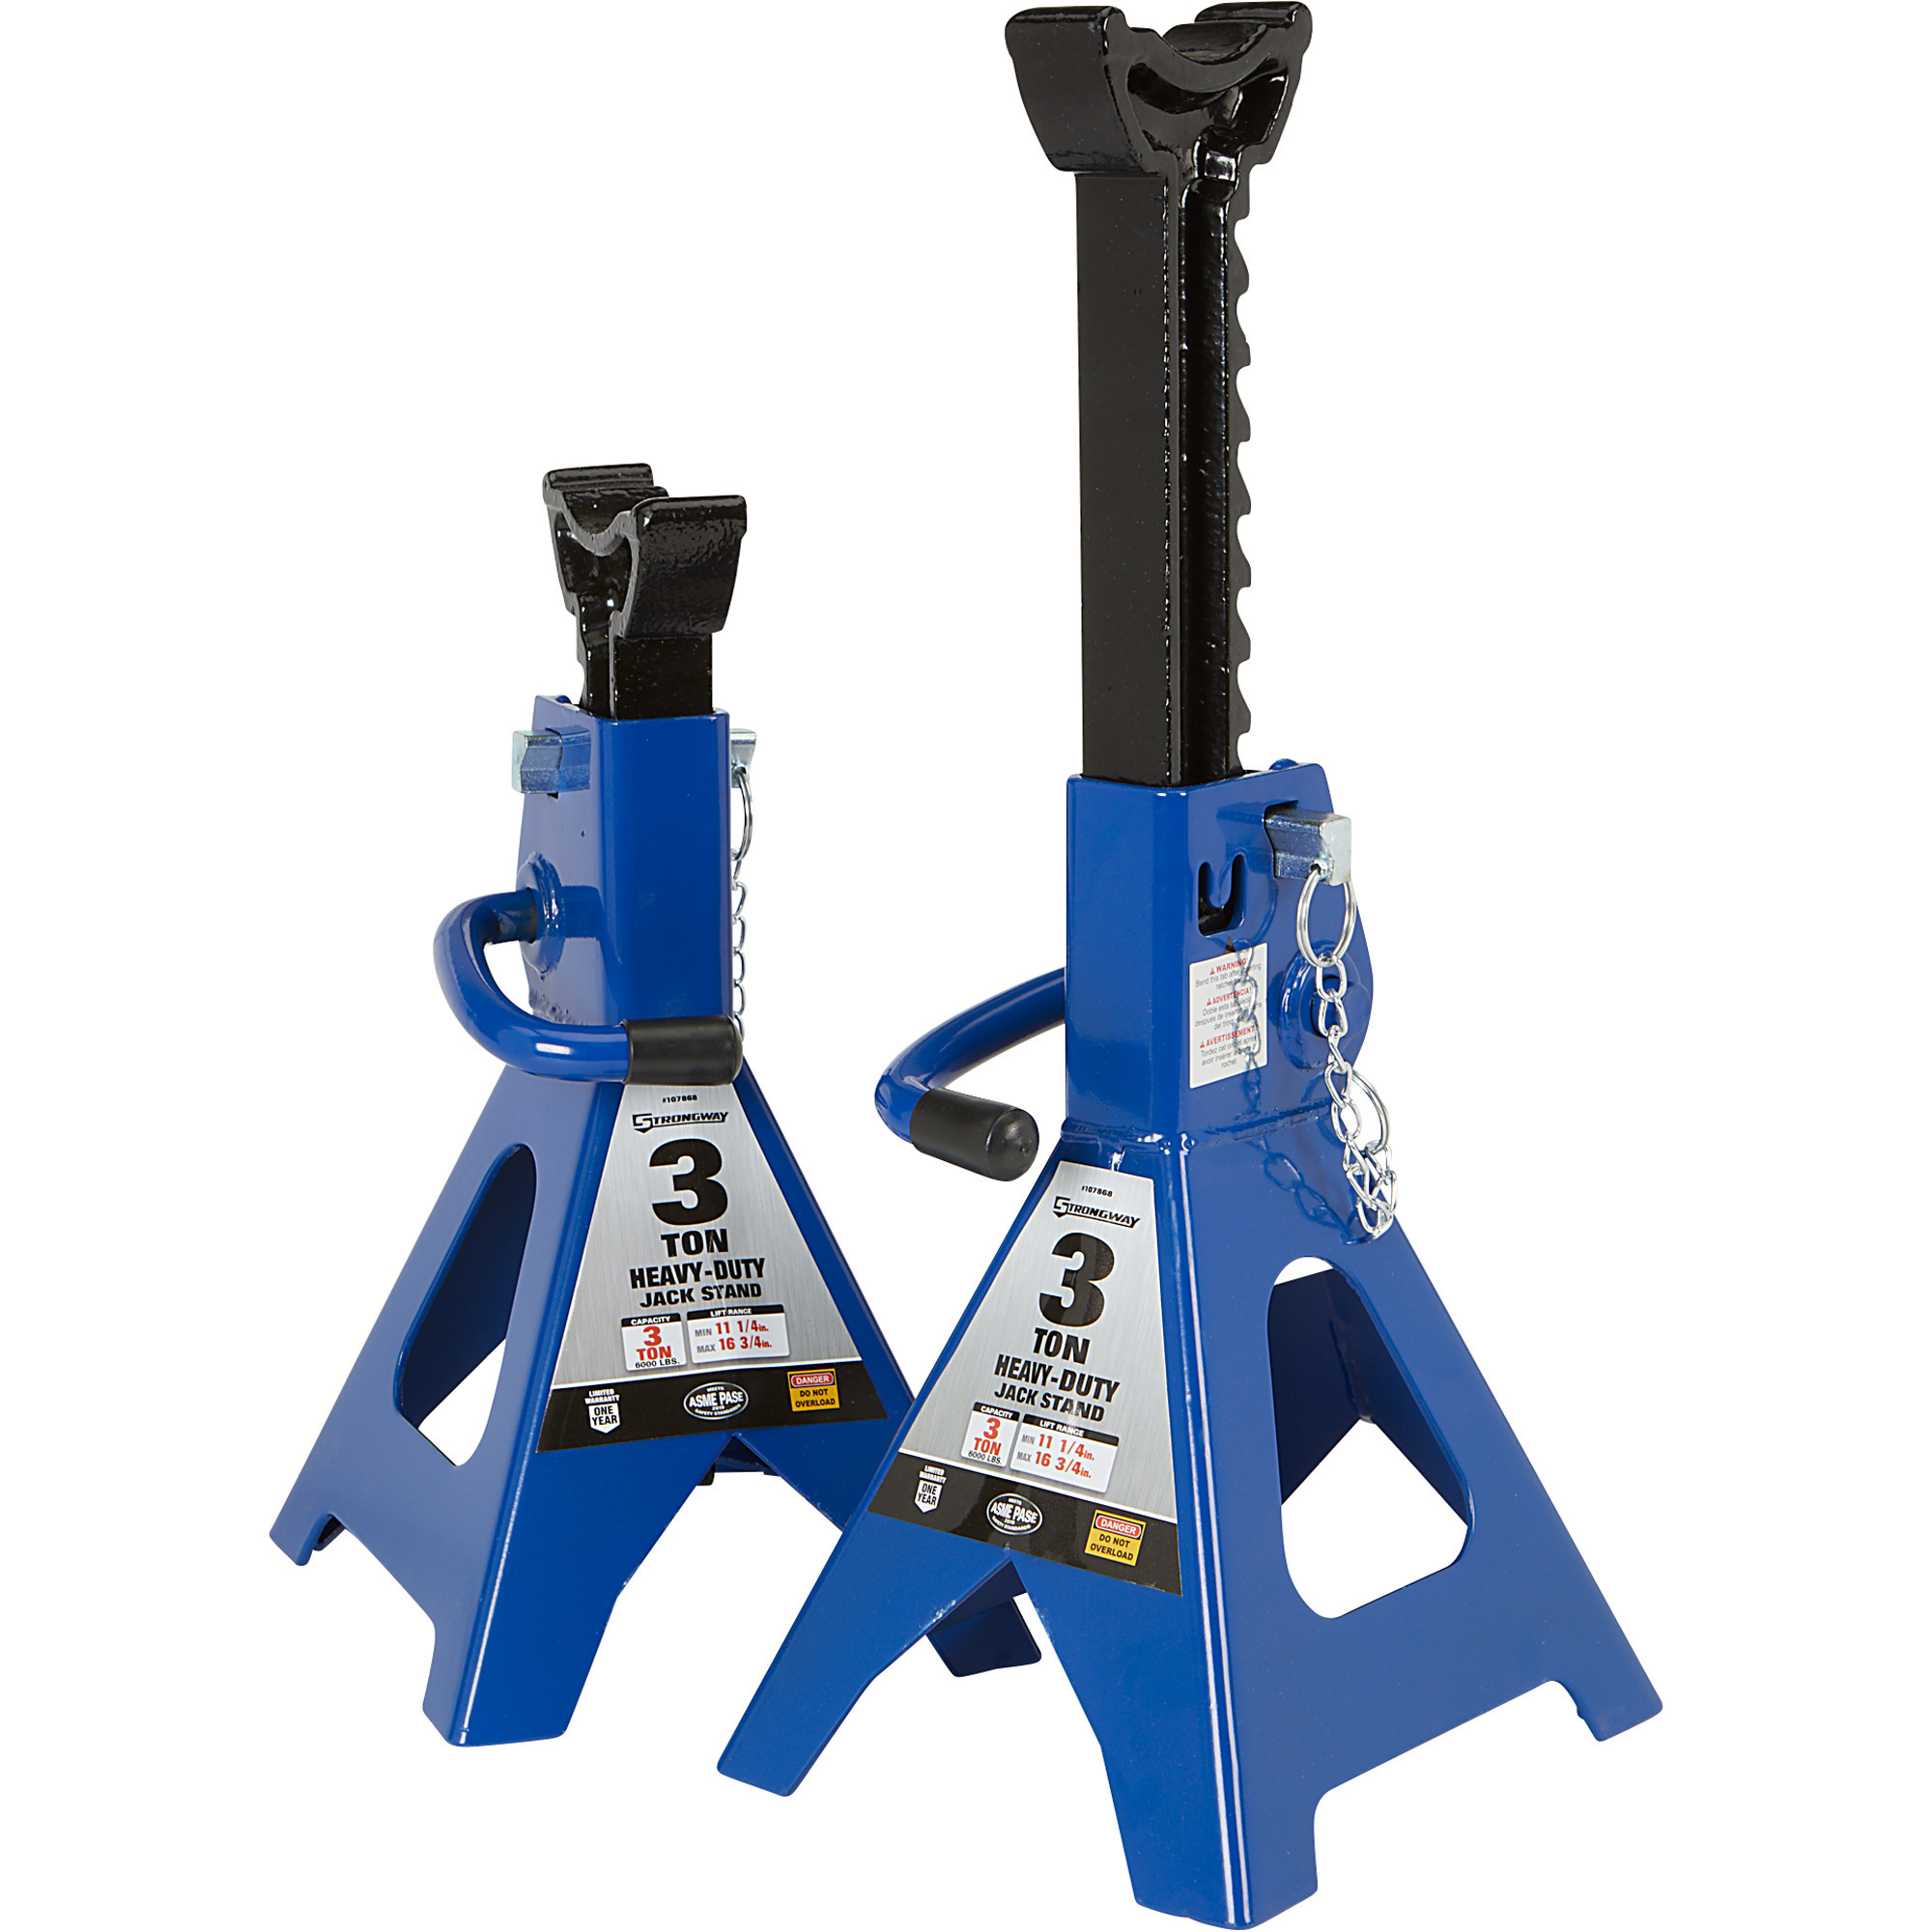 Strongway Double-Locking 3-Ton Jack Stands â 6,000-Lb. Capacity, Pair, Model NT43002A